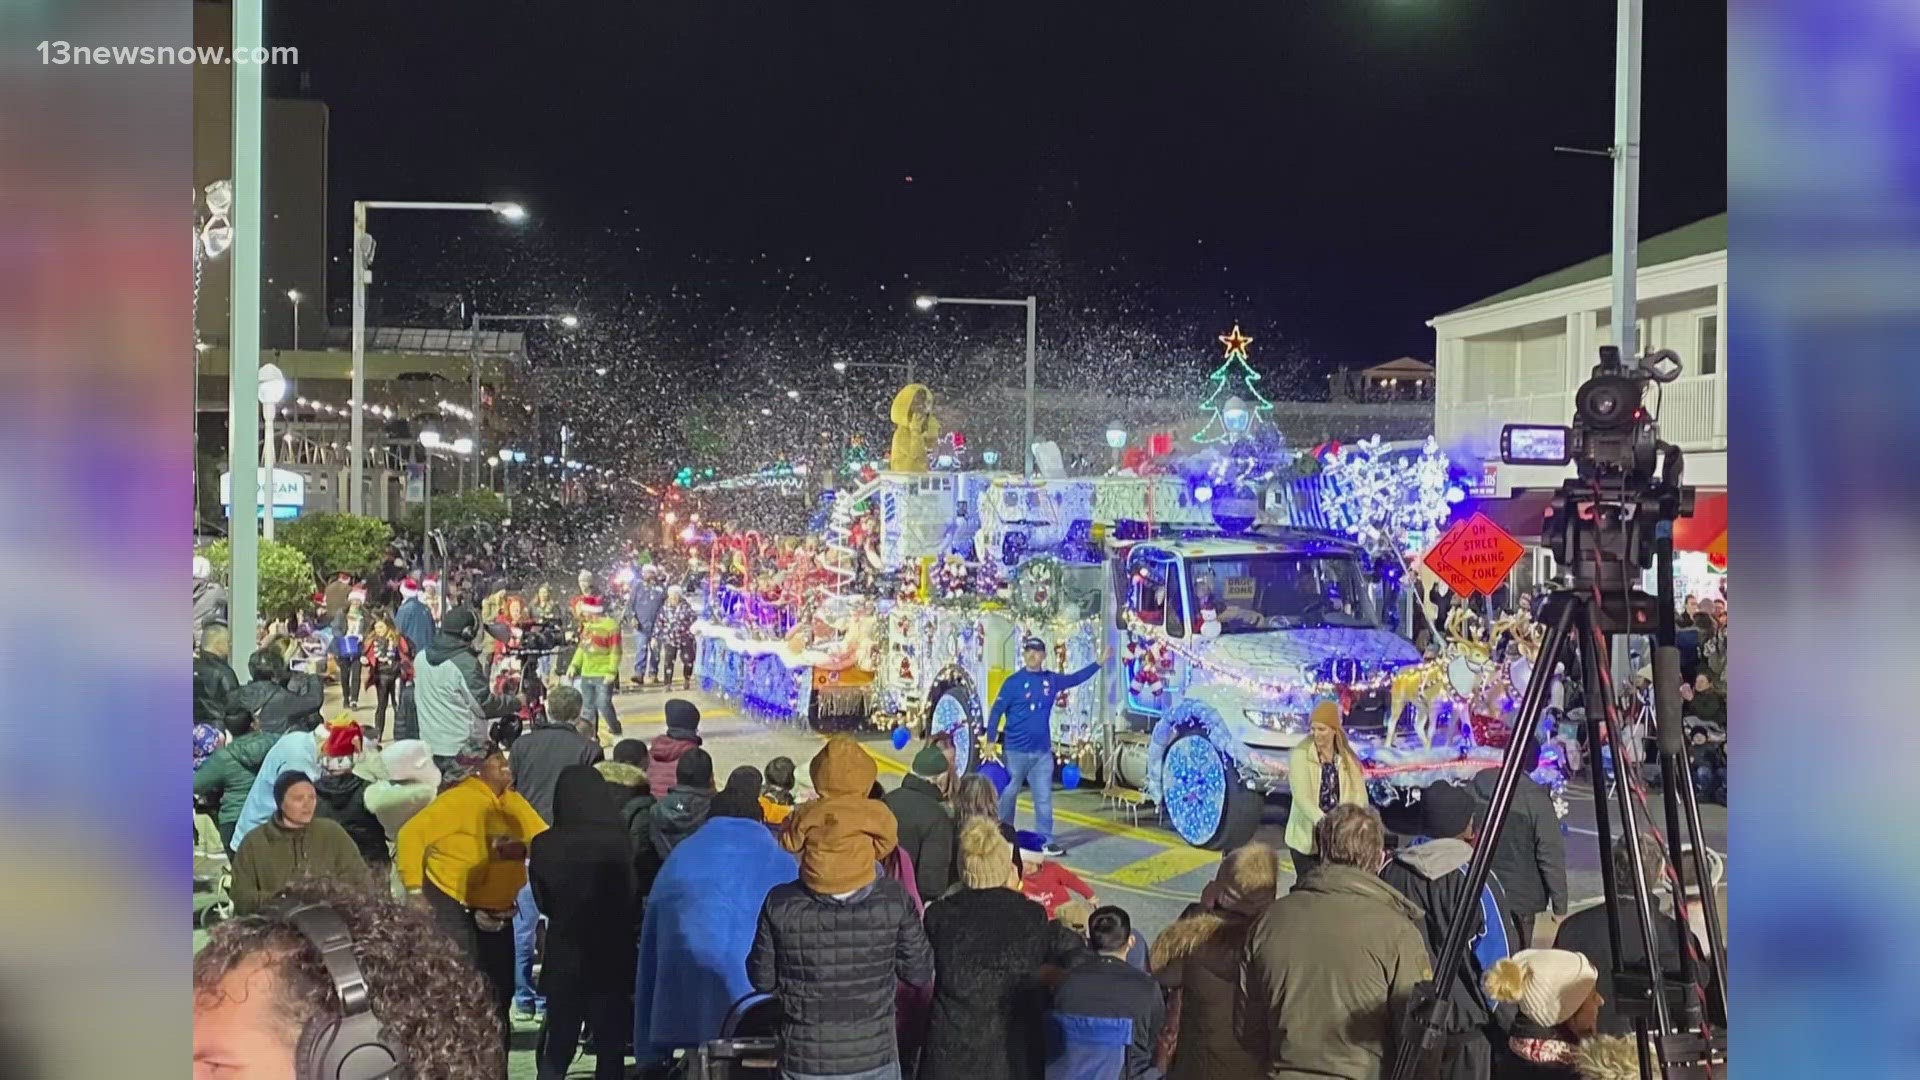 The Parade at the Beach is this Saturday from 5:30 - 7:30 p.m. It's free and open to the public. There will be giant balloons, marching bands, and lighted floats.